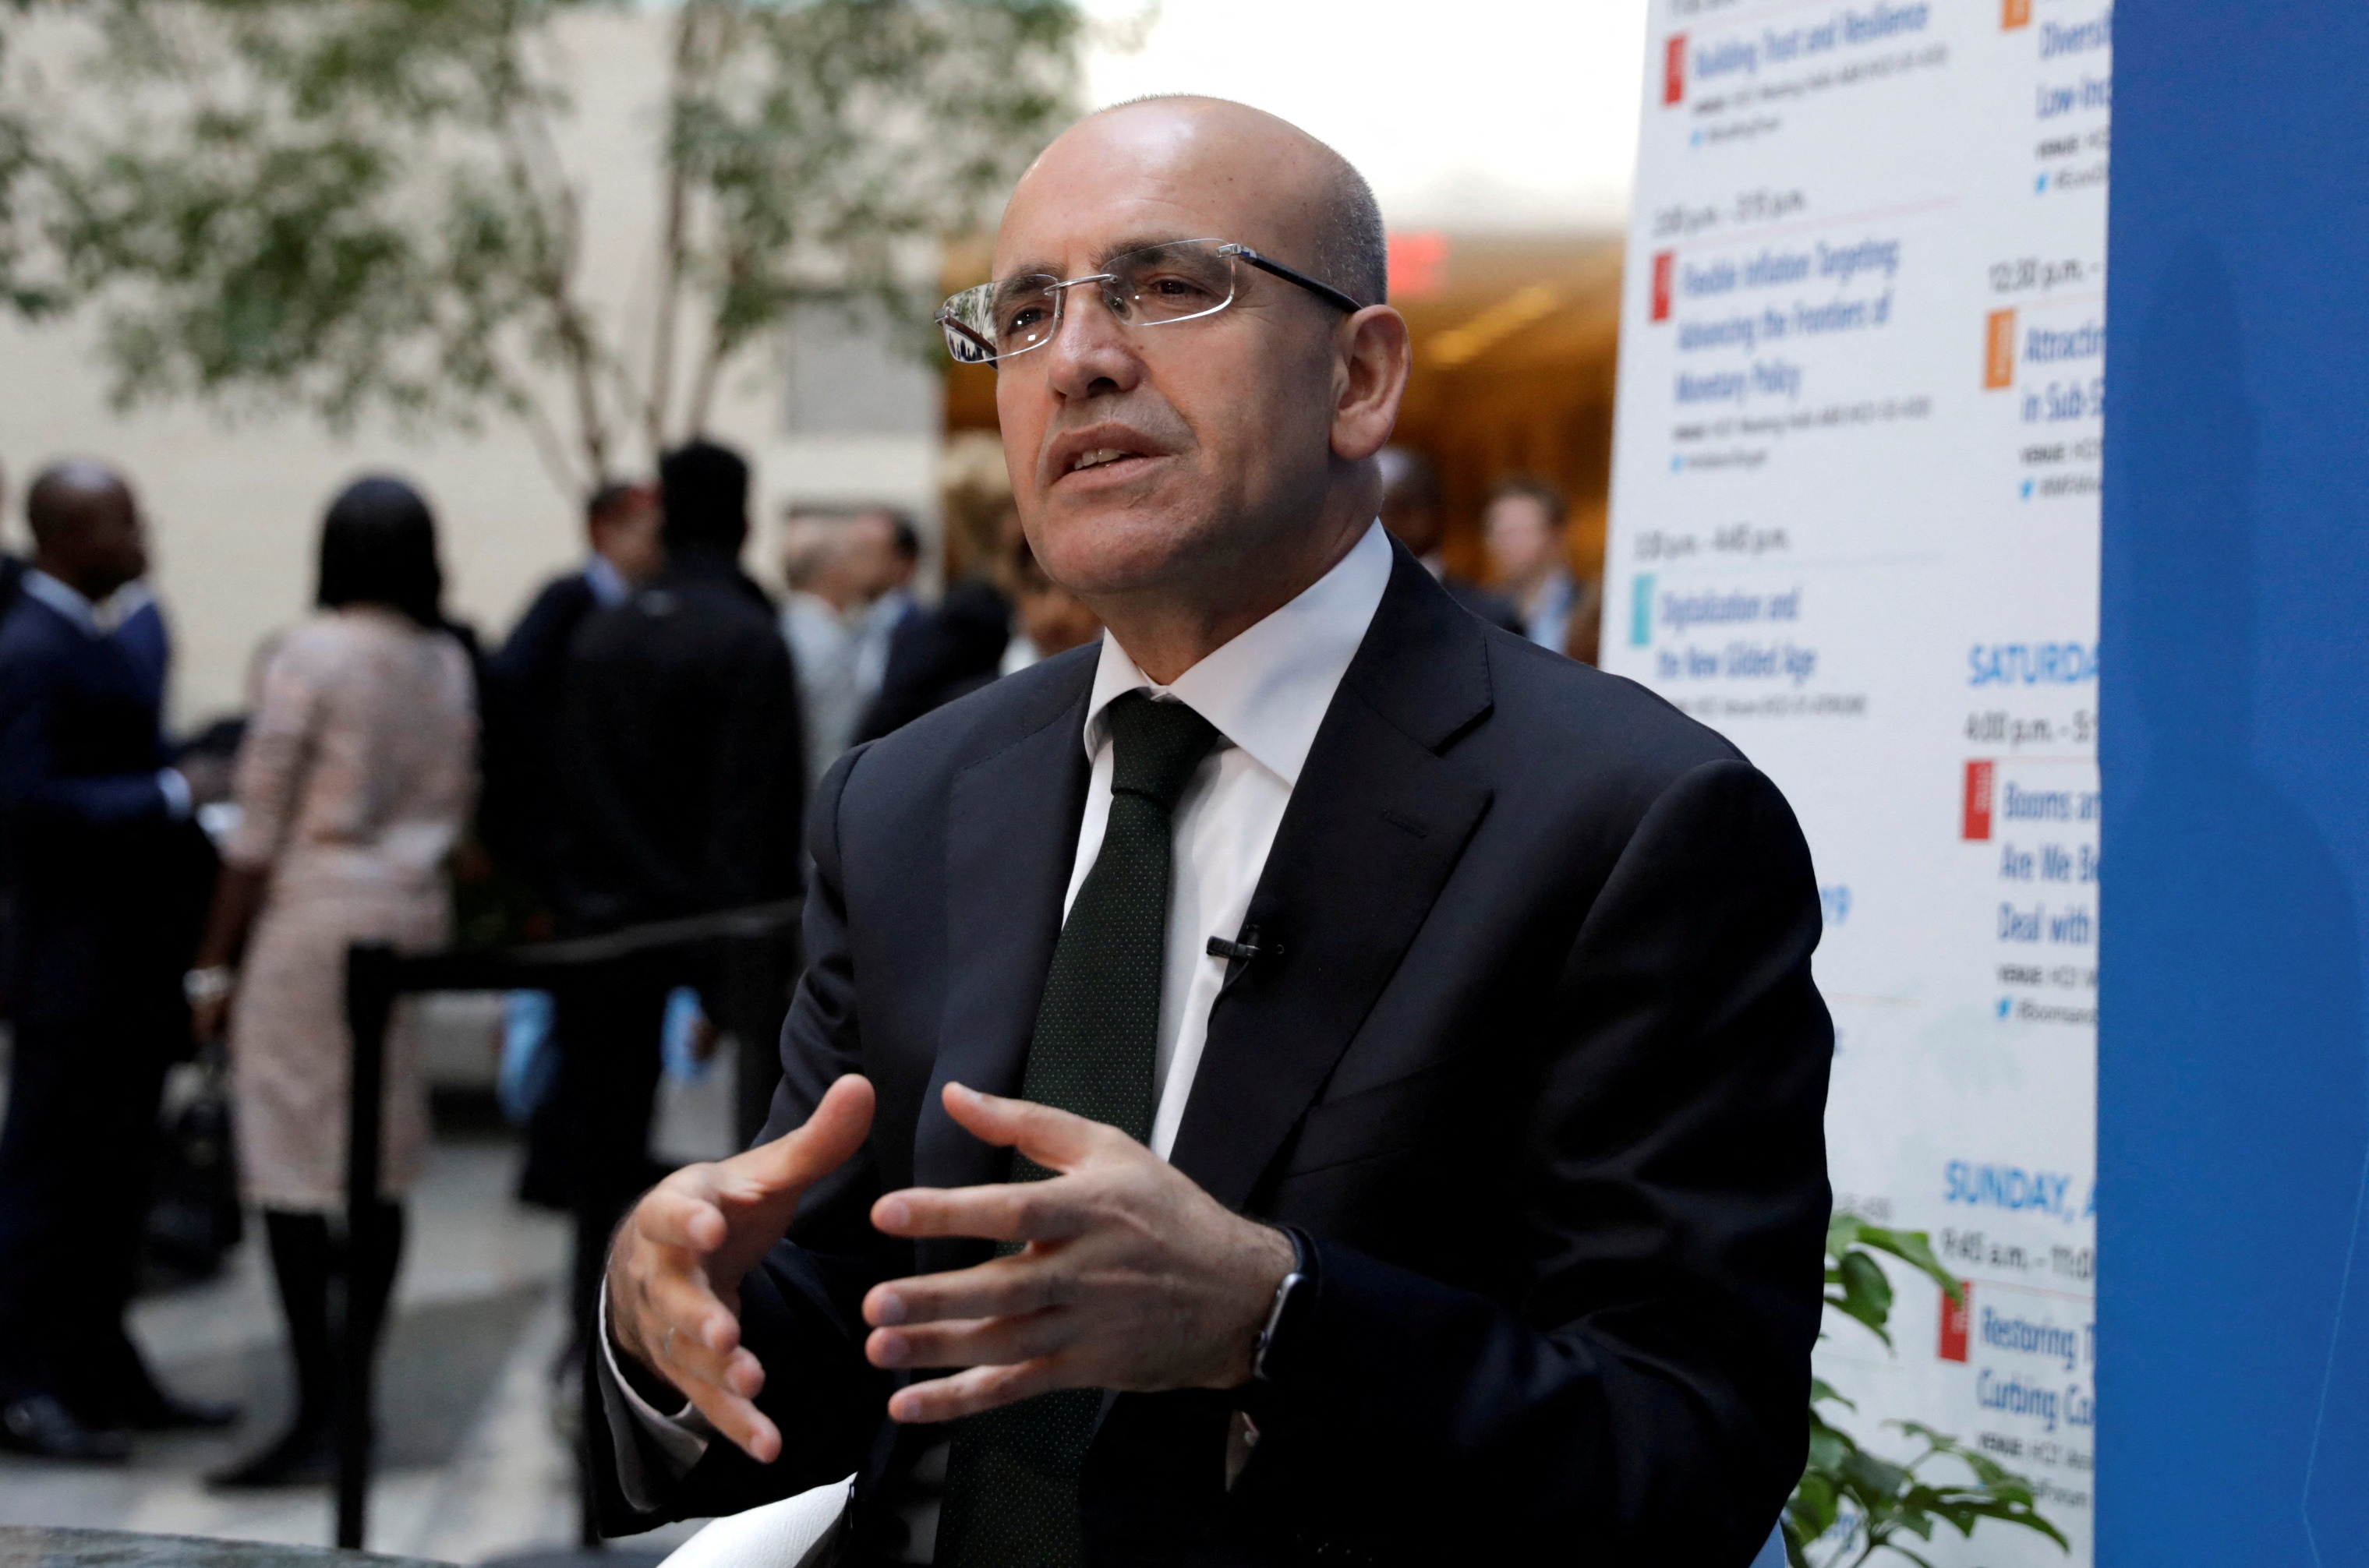 Turkish Deputy Prime Minister Mehmet Simsek speaks during a television interview after IMFC plenary the IMF/World Bank spring meeting in Washington